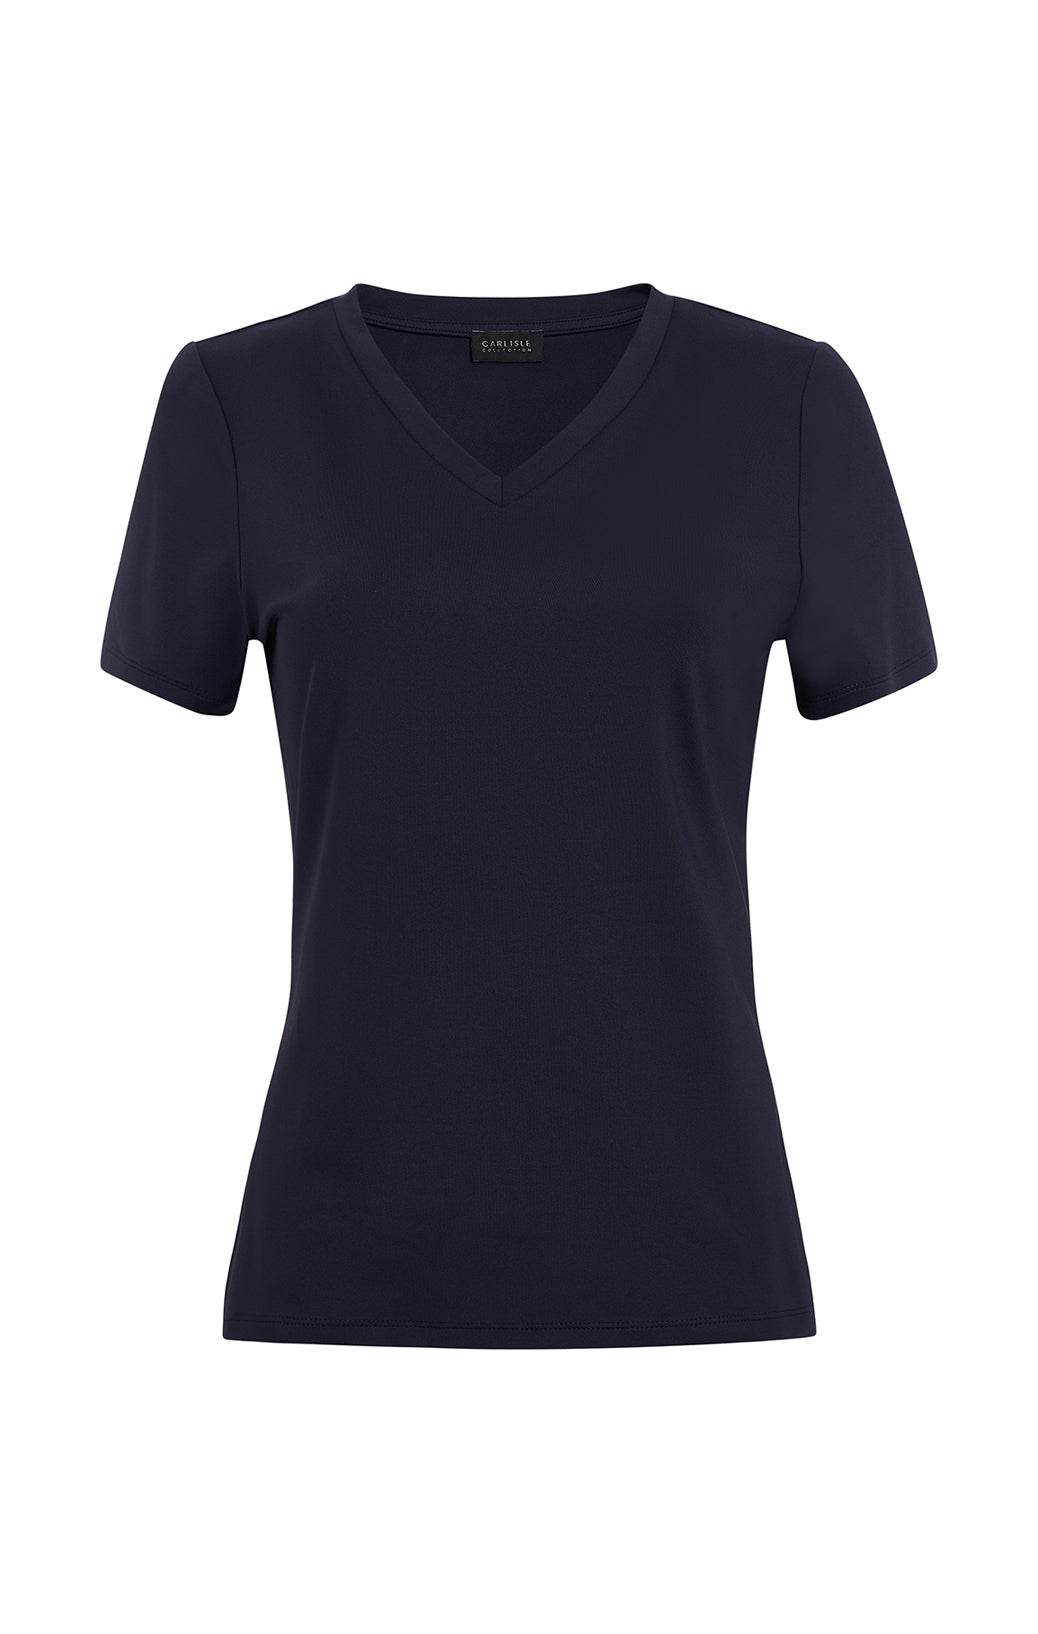 Paradigm-Ivr - Fitted Ivory V-Neck Tee Shirt - Product Image